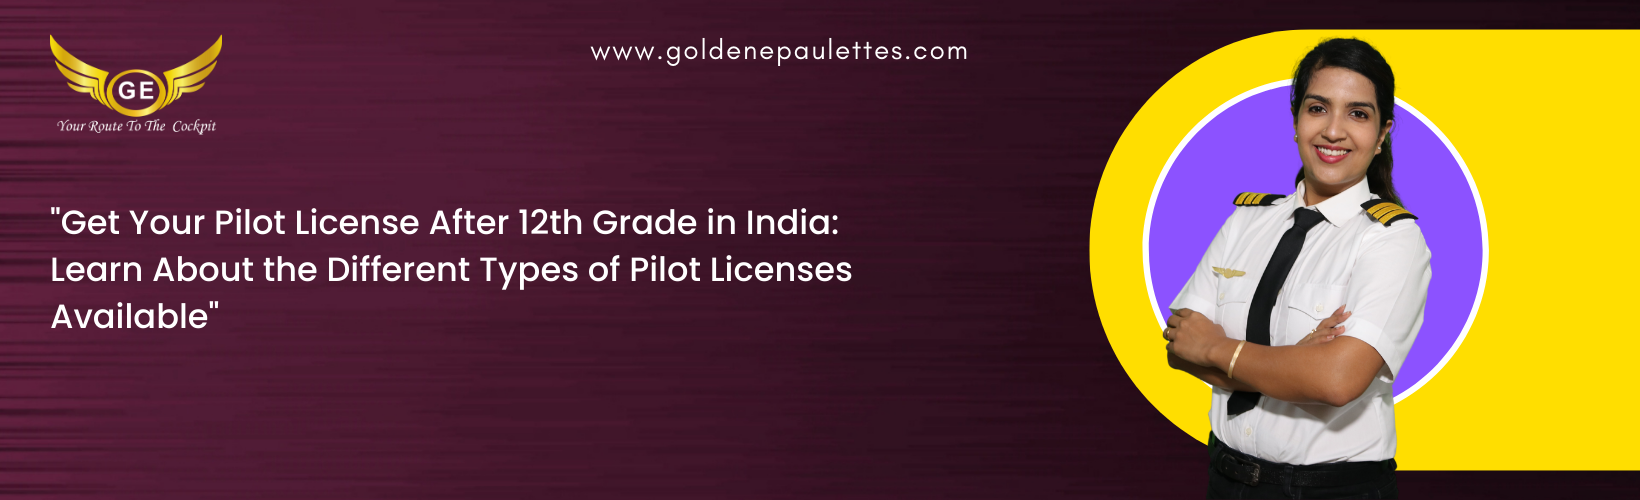 What Are the Different Types of Pilot Licenses After 12th in India